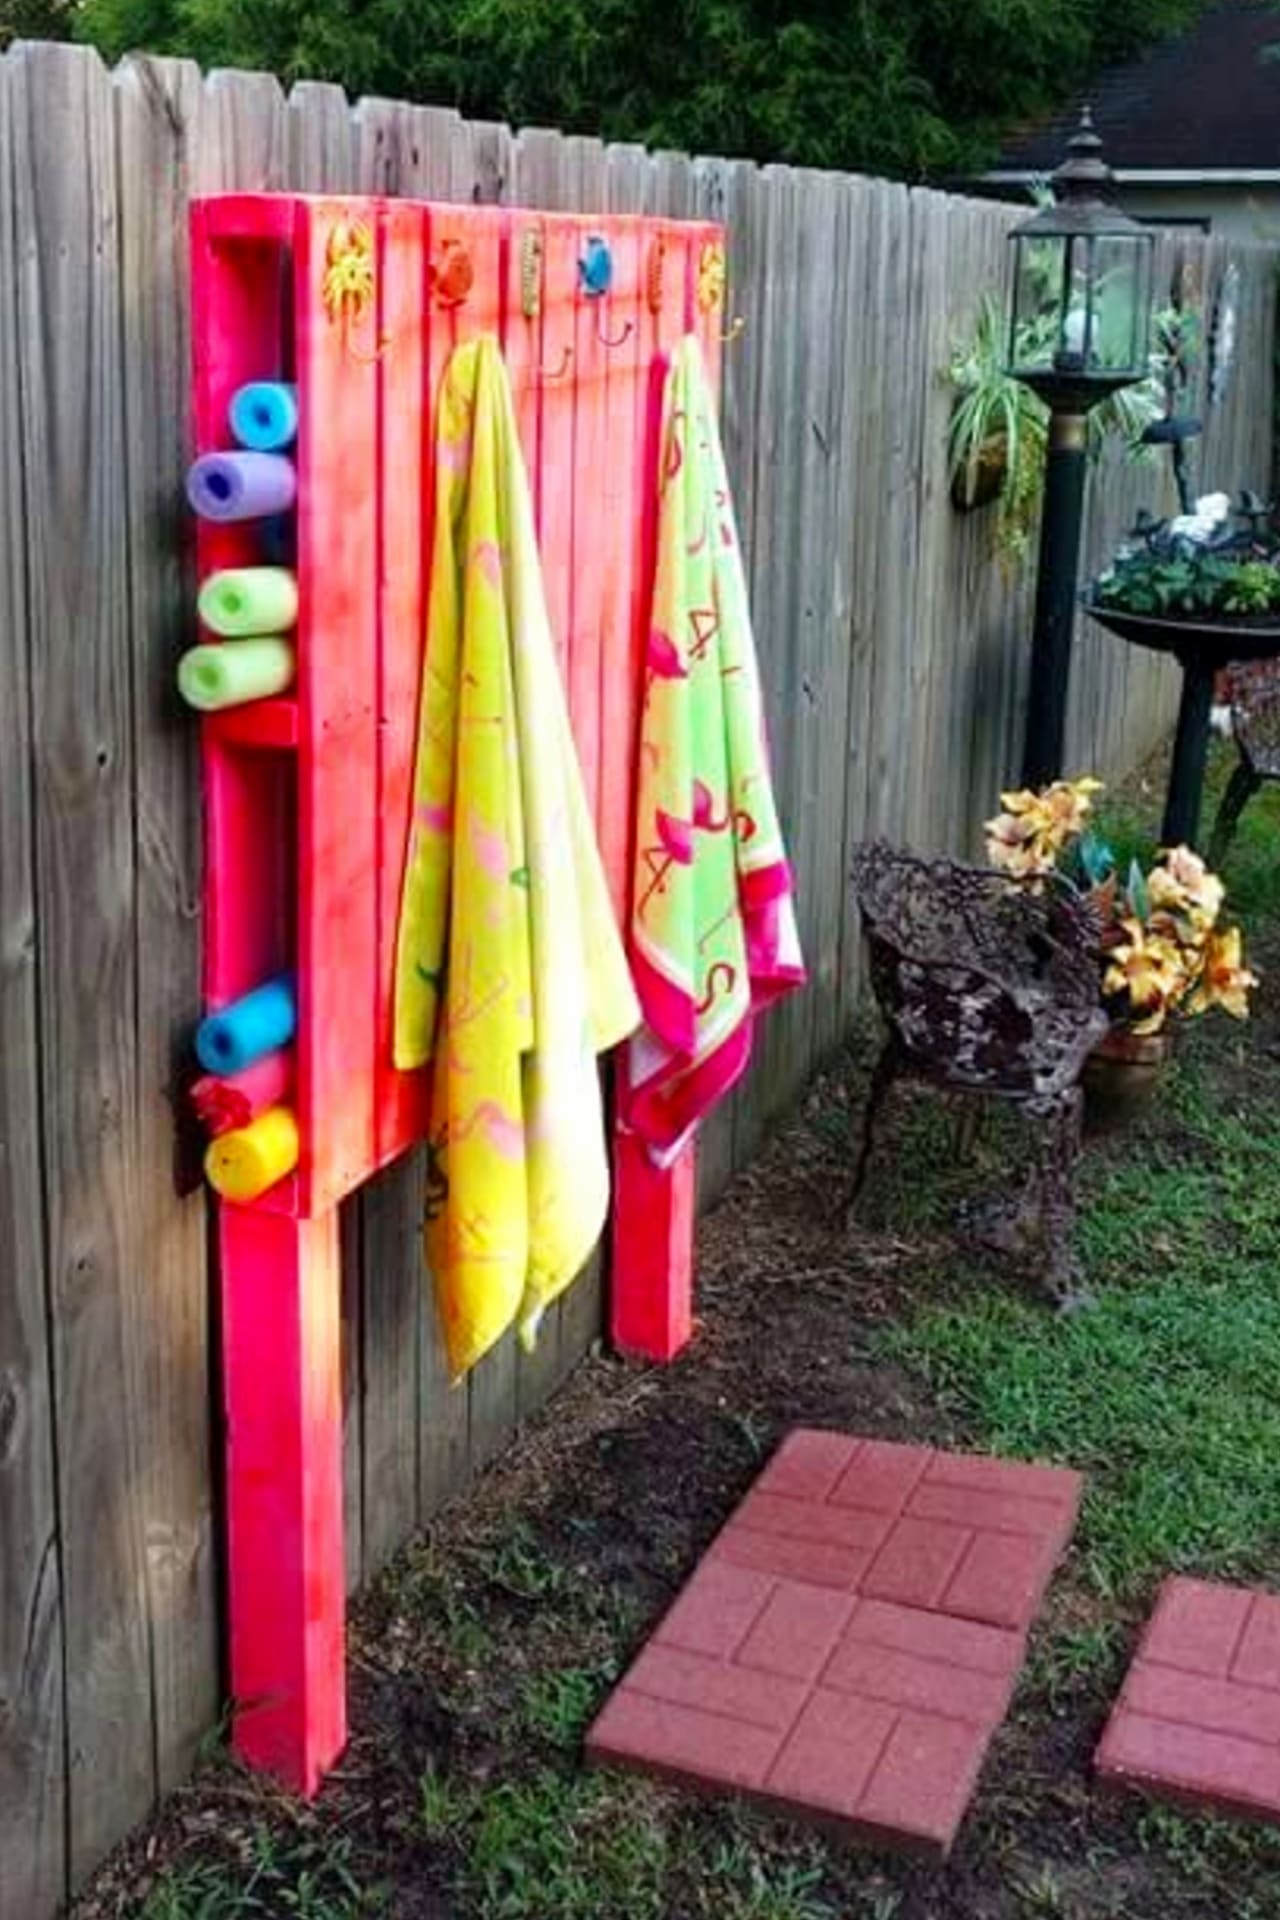 Pallet Projects - Easy DIY outdoor pallet furniture and pallet projects to make or sell - VERY clever pallet projects!  Pallet fence outdoor organizer for pool toys and towels